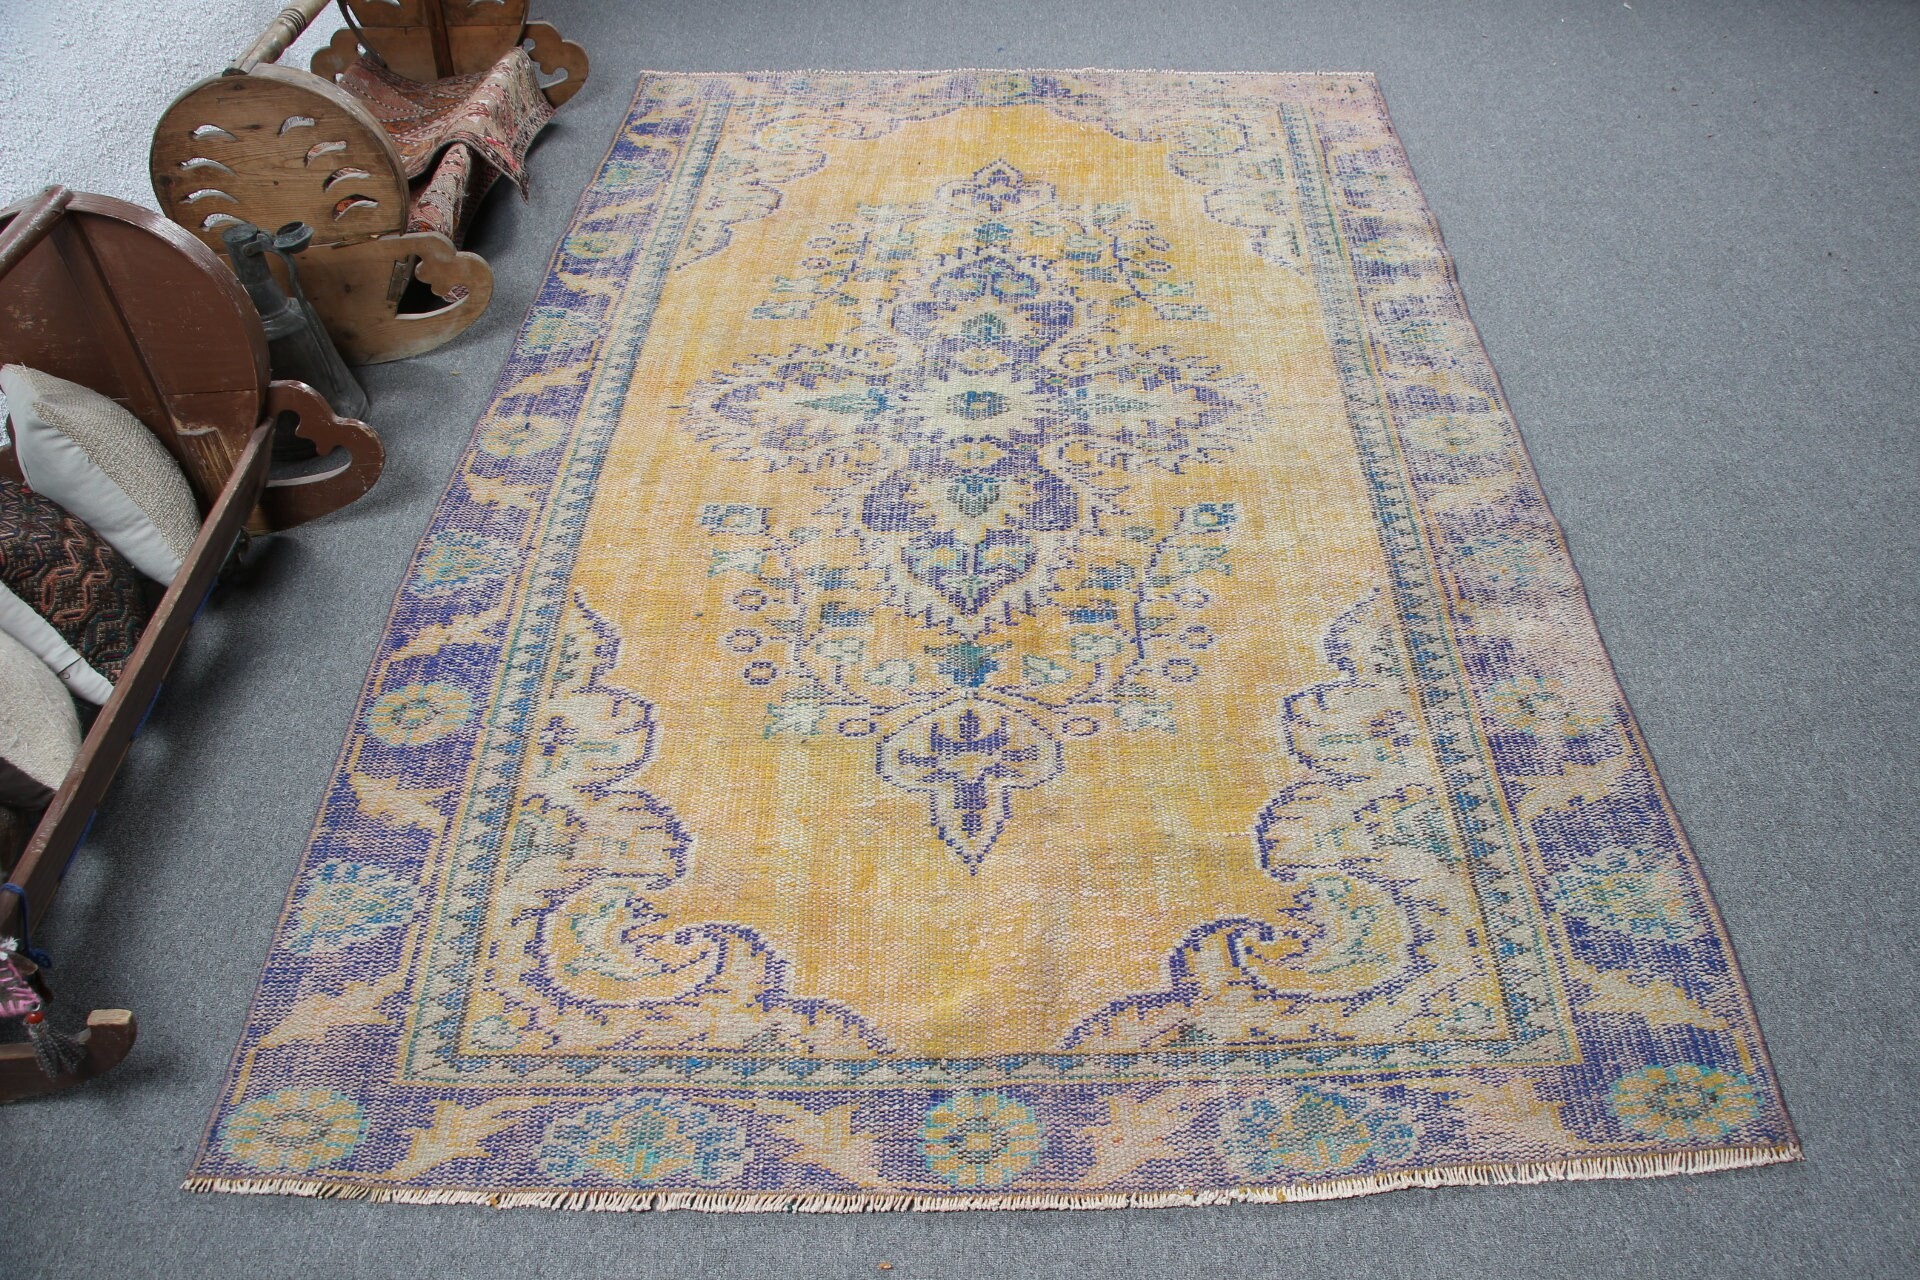 Rugs for Dining Room, Antique Rug, Yellow Bedroom Rugs, Dining Room Rugs, 5.2x8.6 ft Large Rug, Anatolian Rugs, Turkish Rug, Vintage Rugs